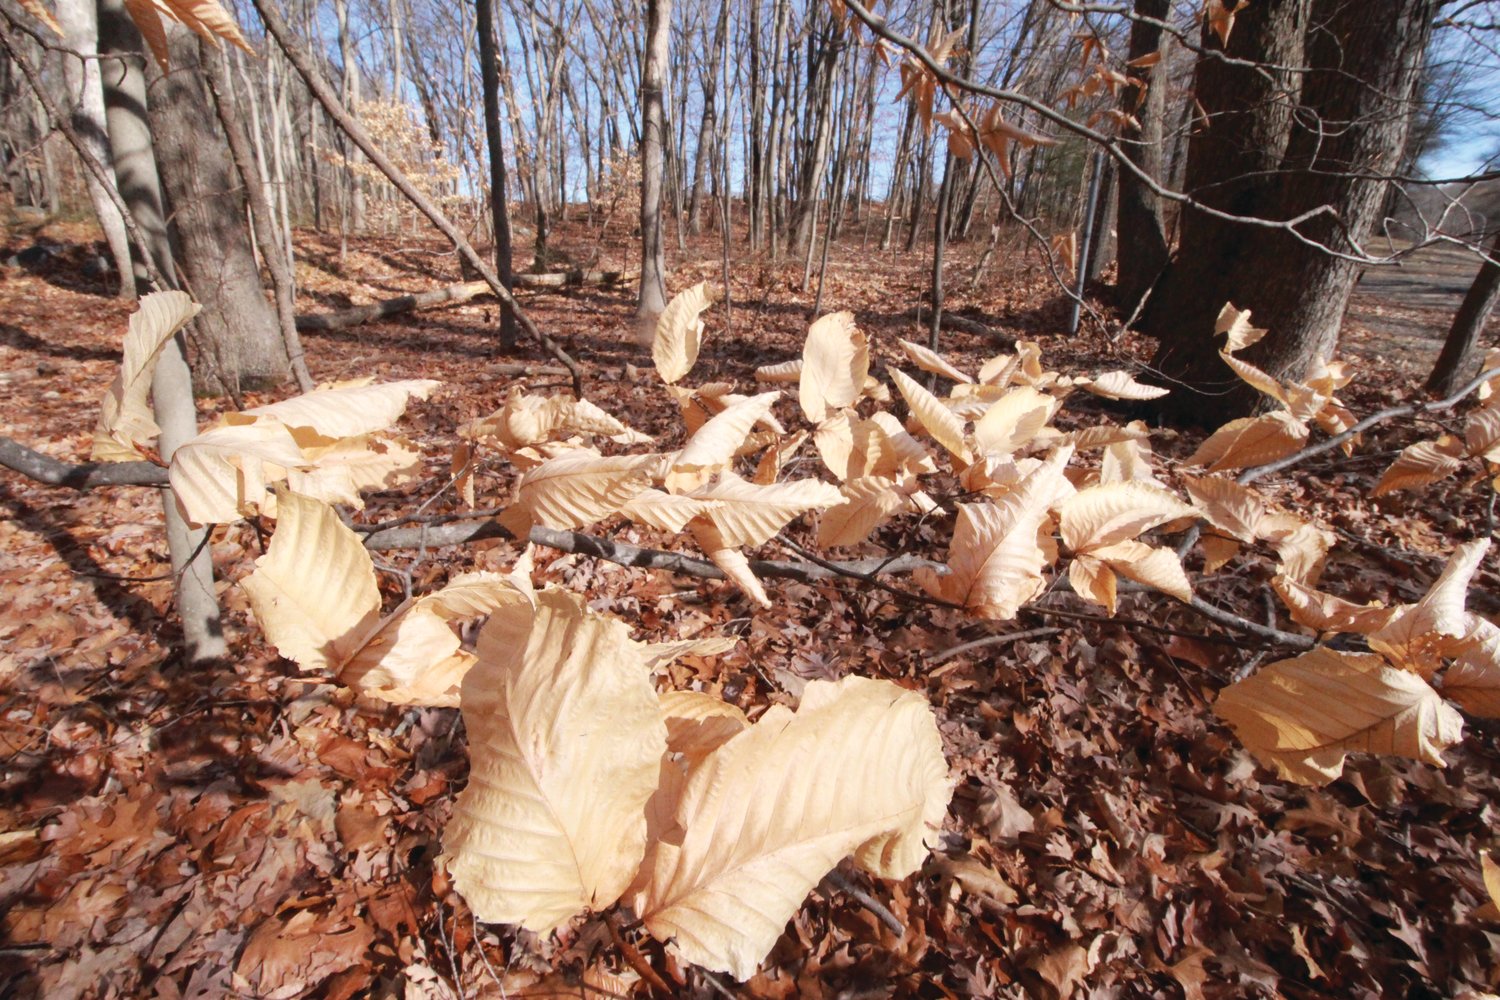 IN A BEECH FOREST: Nathan Cornell has identified a stand of beech trees in the woodlands of the CCRI Knight Campus.